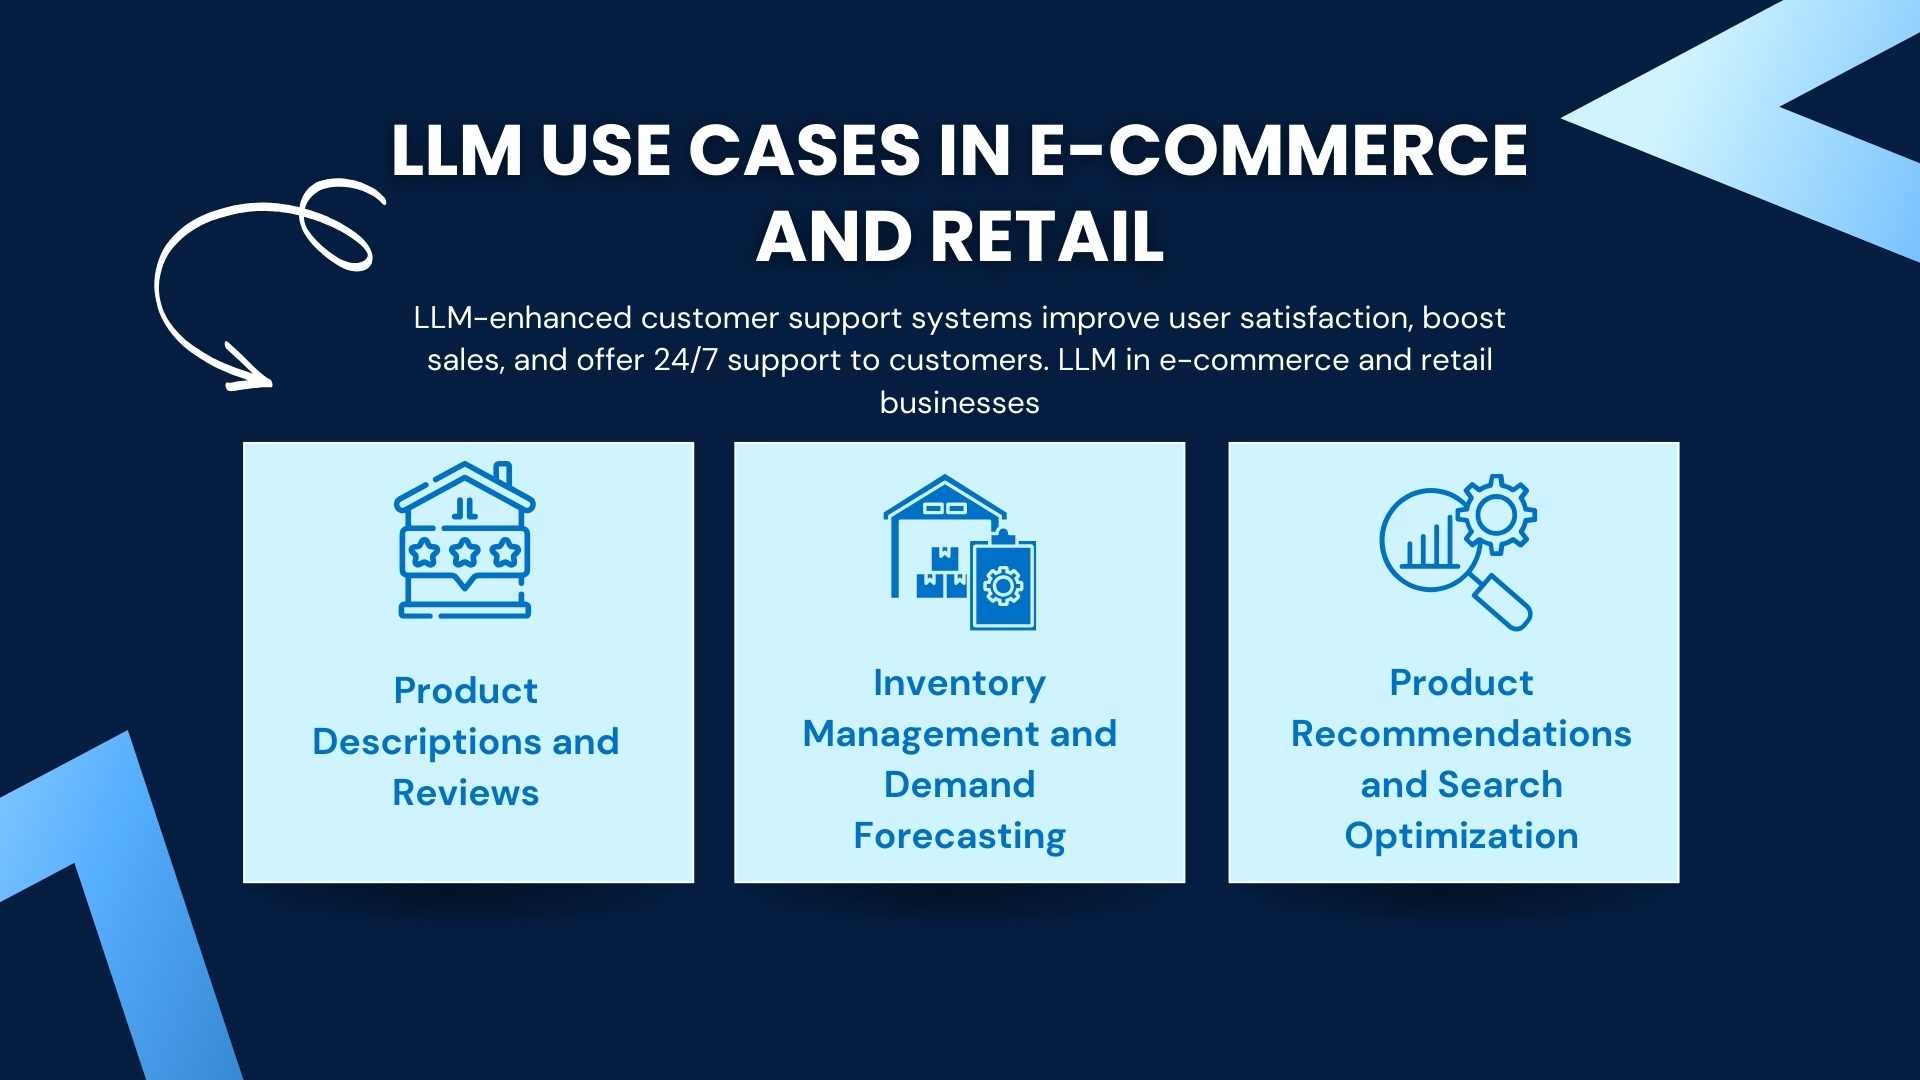 llm Use Cases in E-commerce and Retail